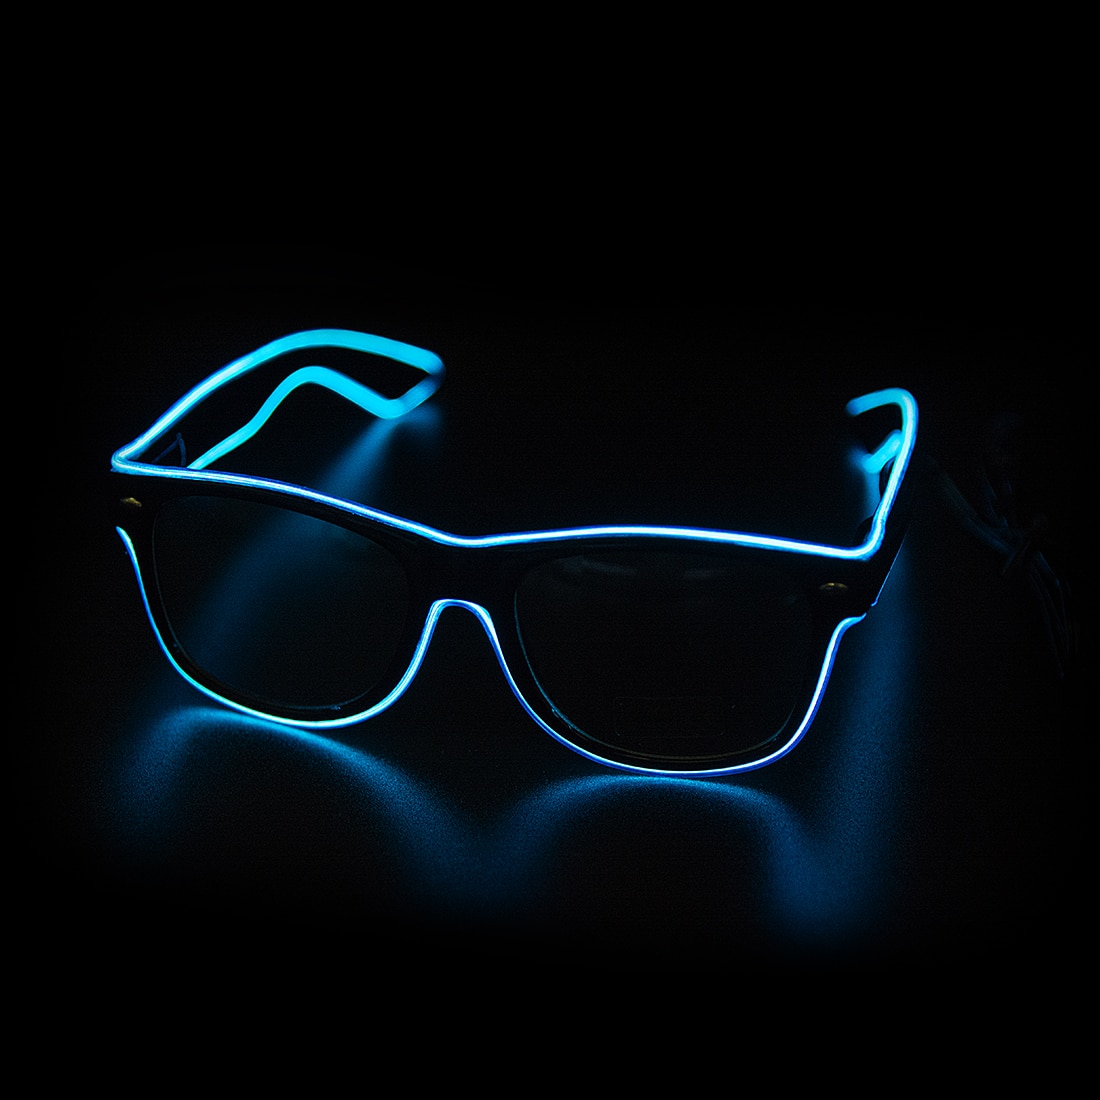 shop with crypto buy Led Glasses Neon Party Flashing Glasses EL Wire Glowing Gafas Luminous Bril Novelty Gift Glow Sunglasses Bright Light Supplies pay with bitcoin